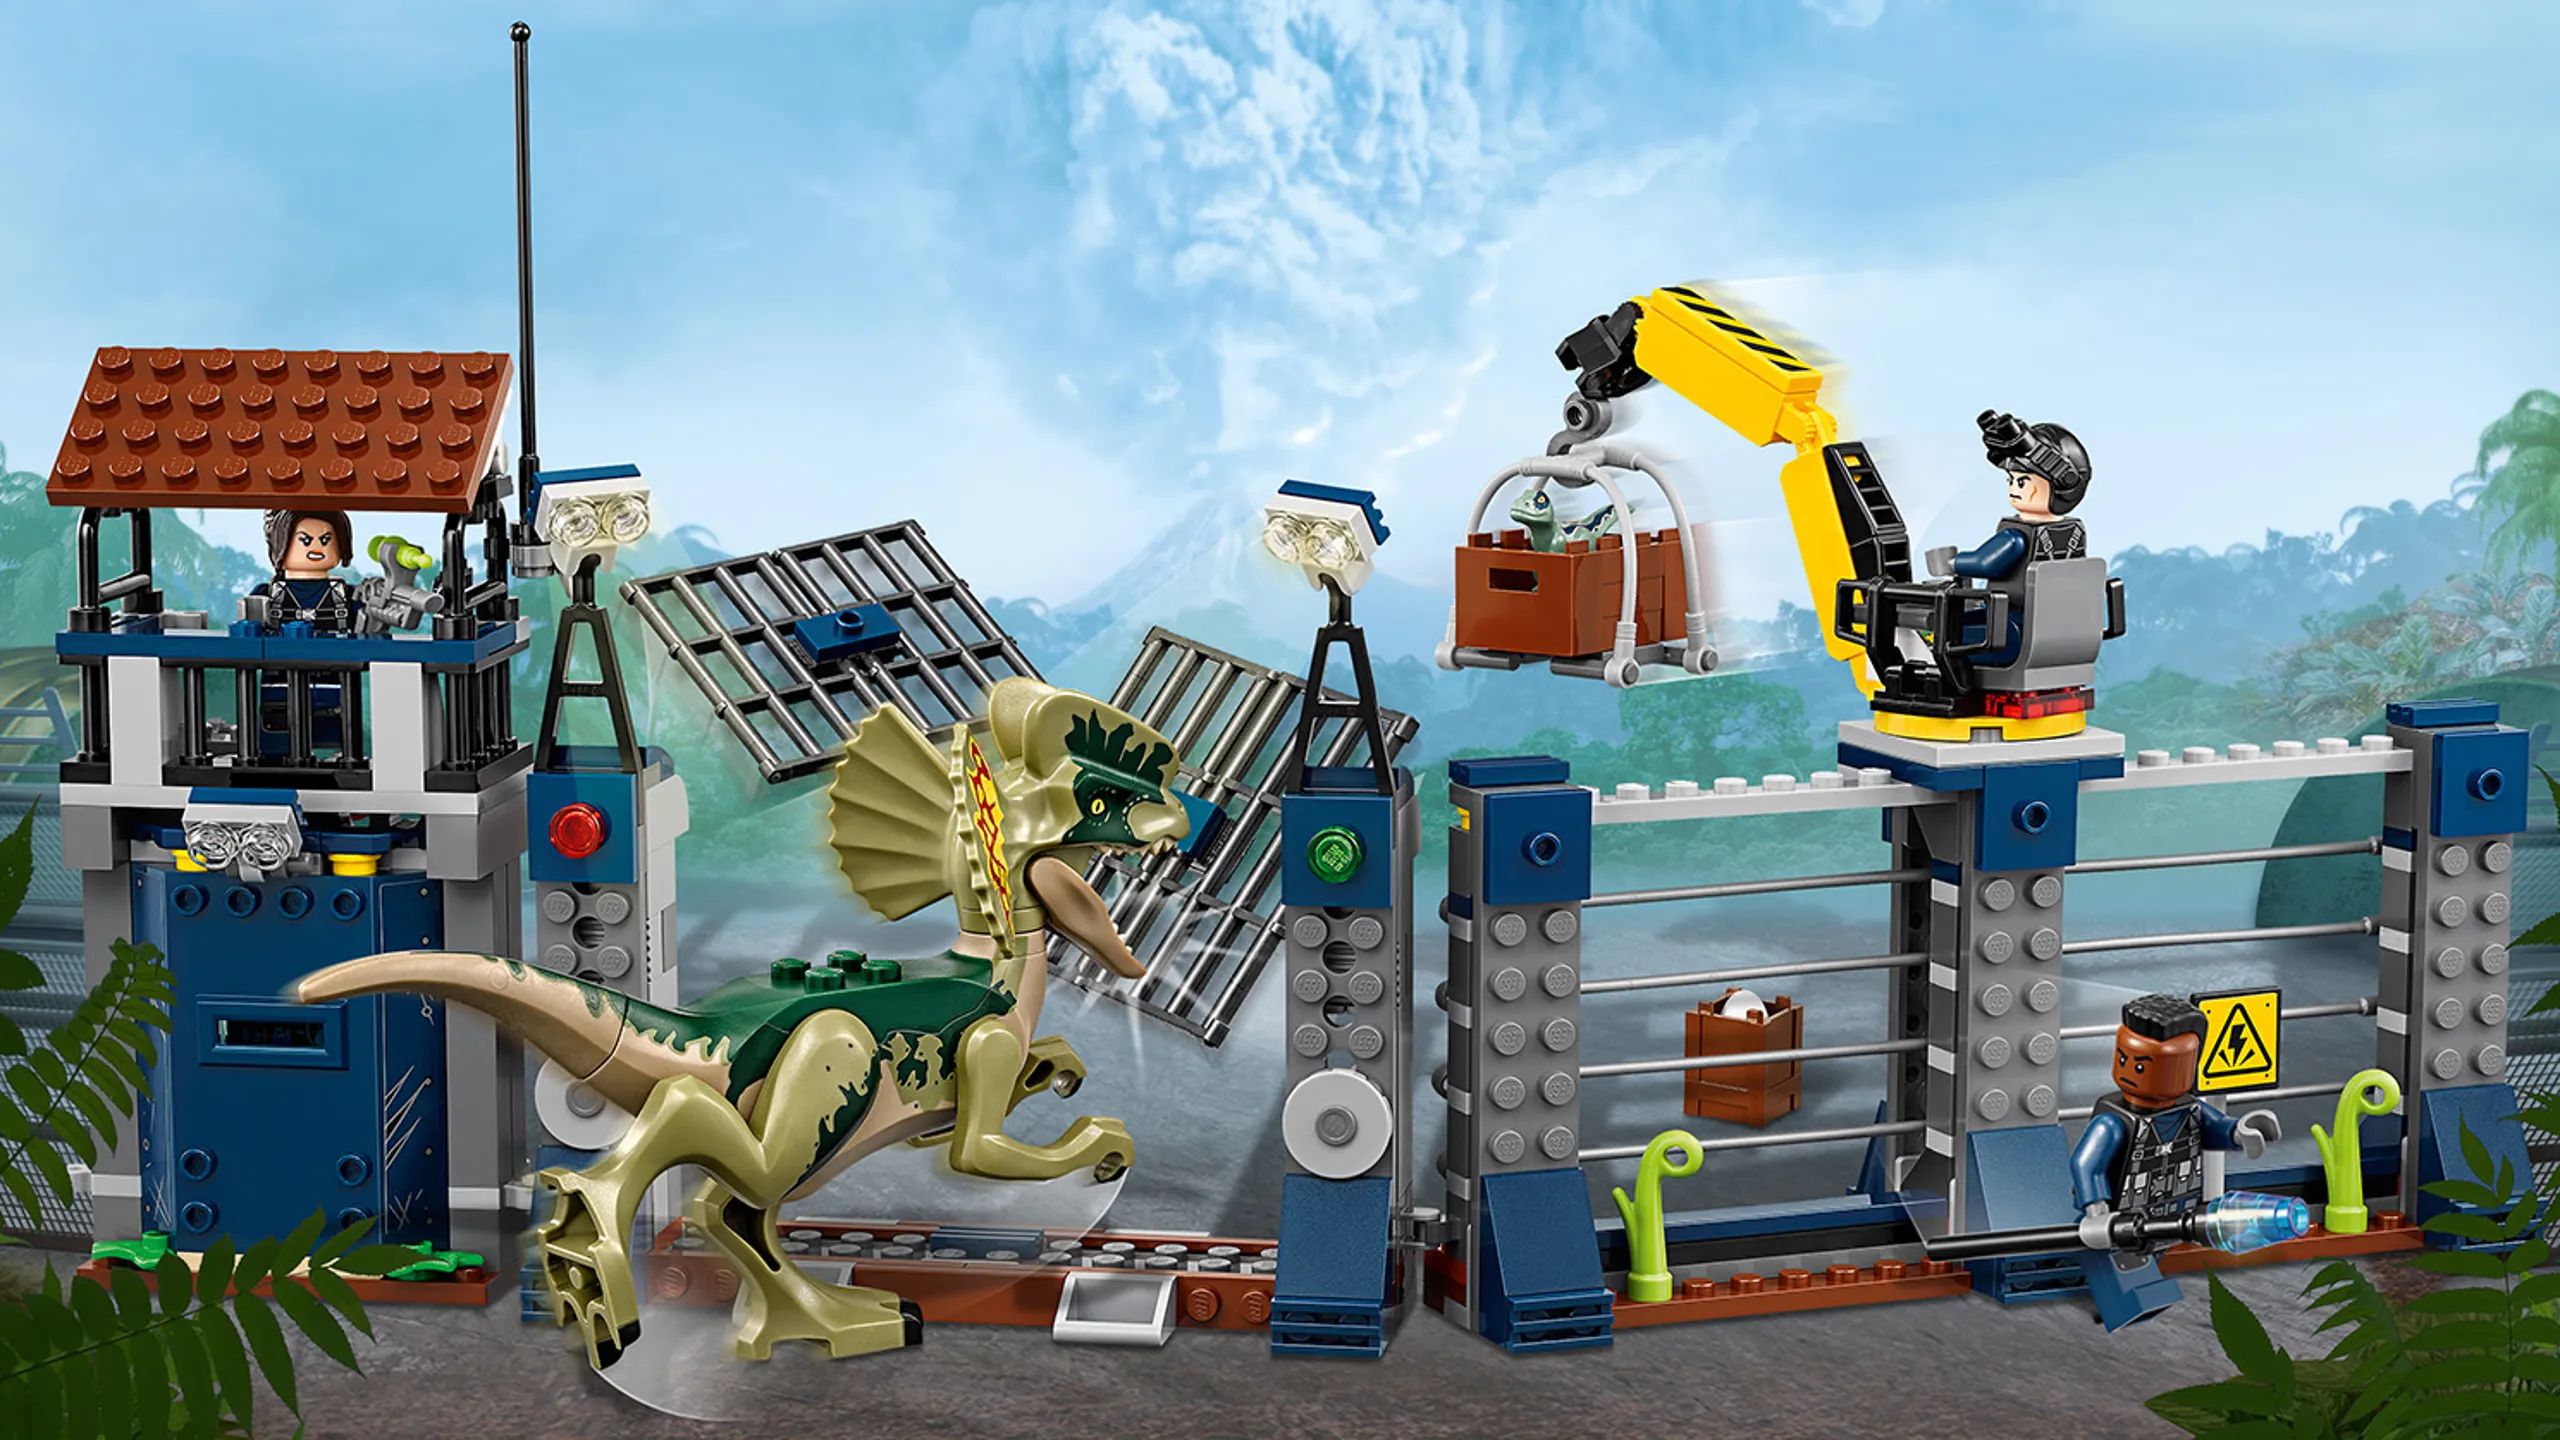 LEGO Jurassic World - 75931 Dilophosaurus Outpost Attack - Dilophosaurus breaks through the fence in the pre-historic jungle made by the humans.